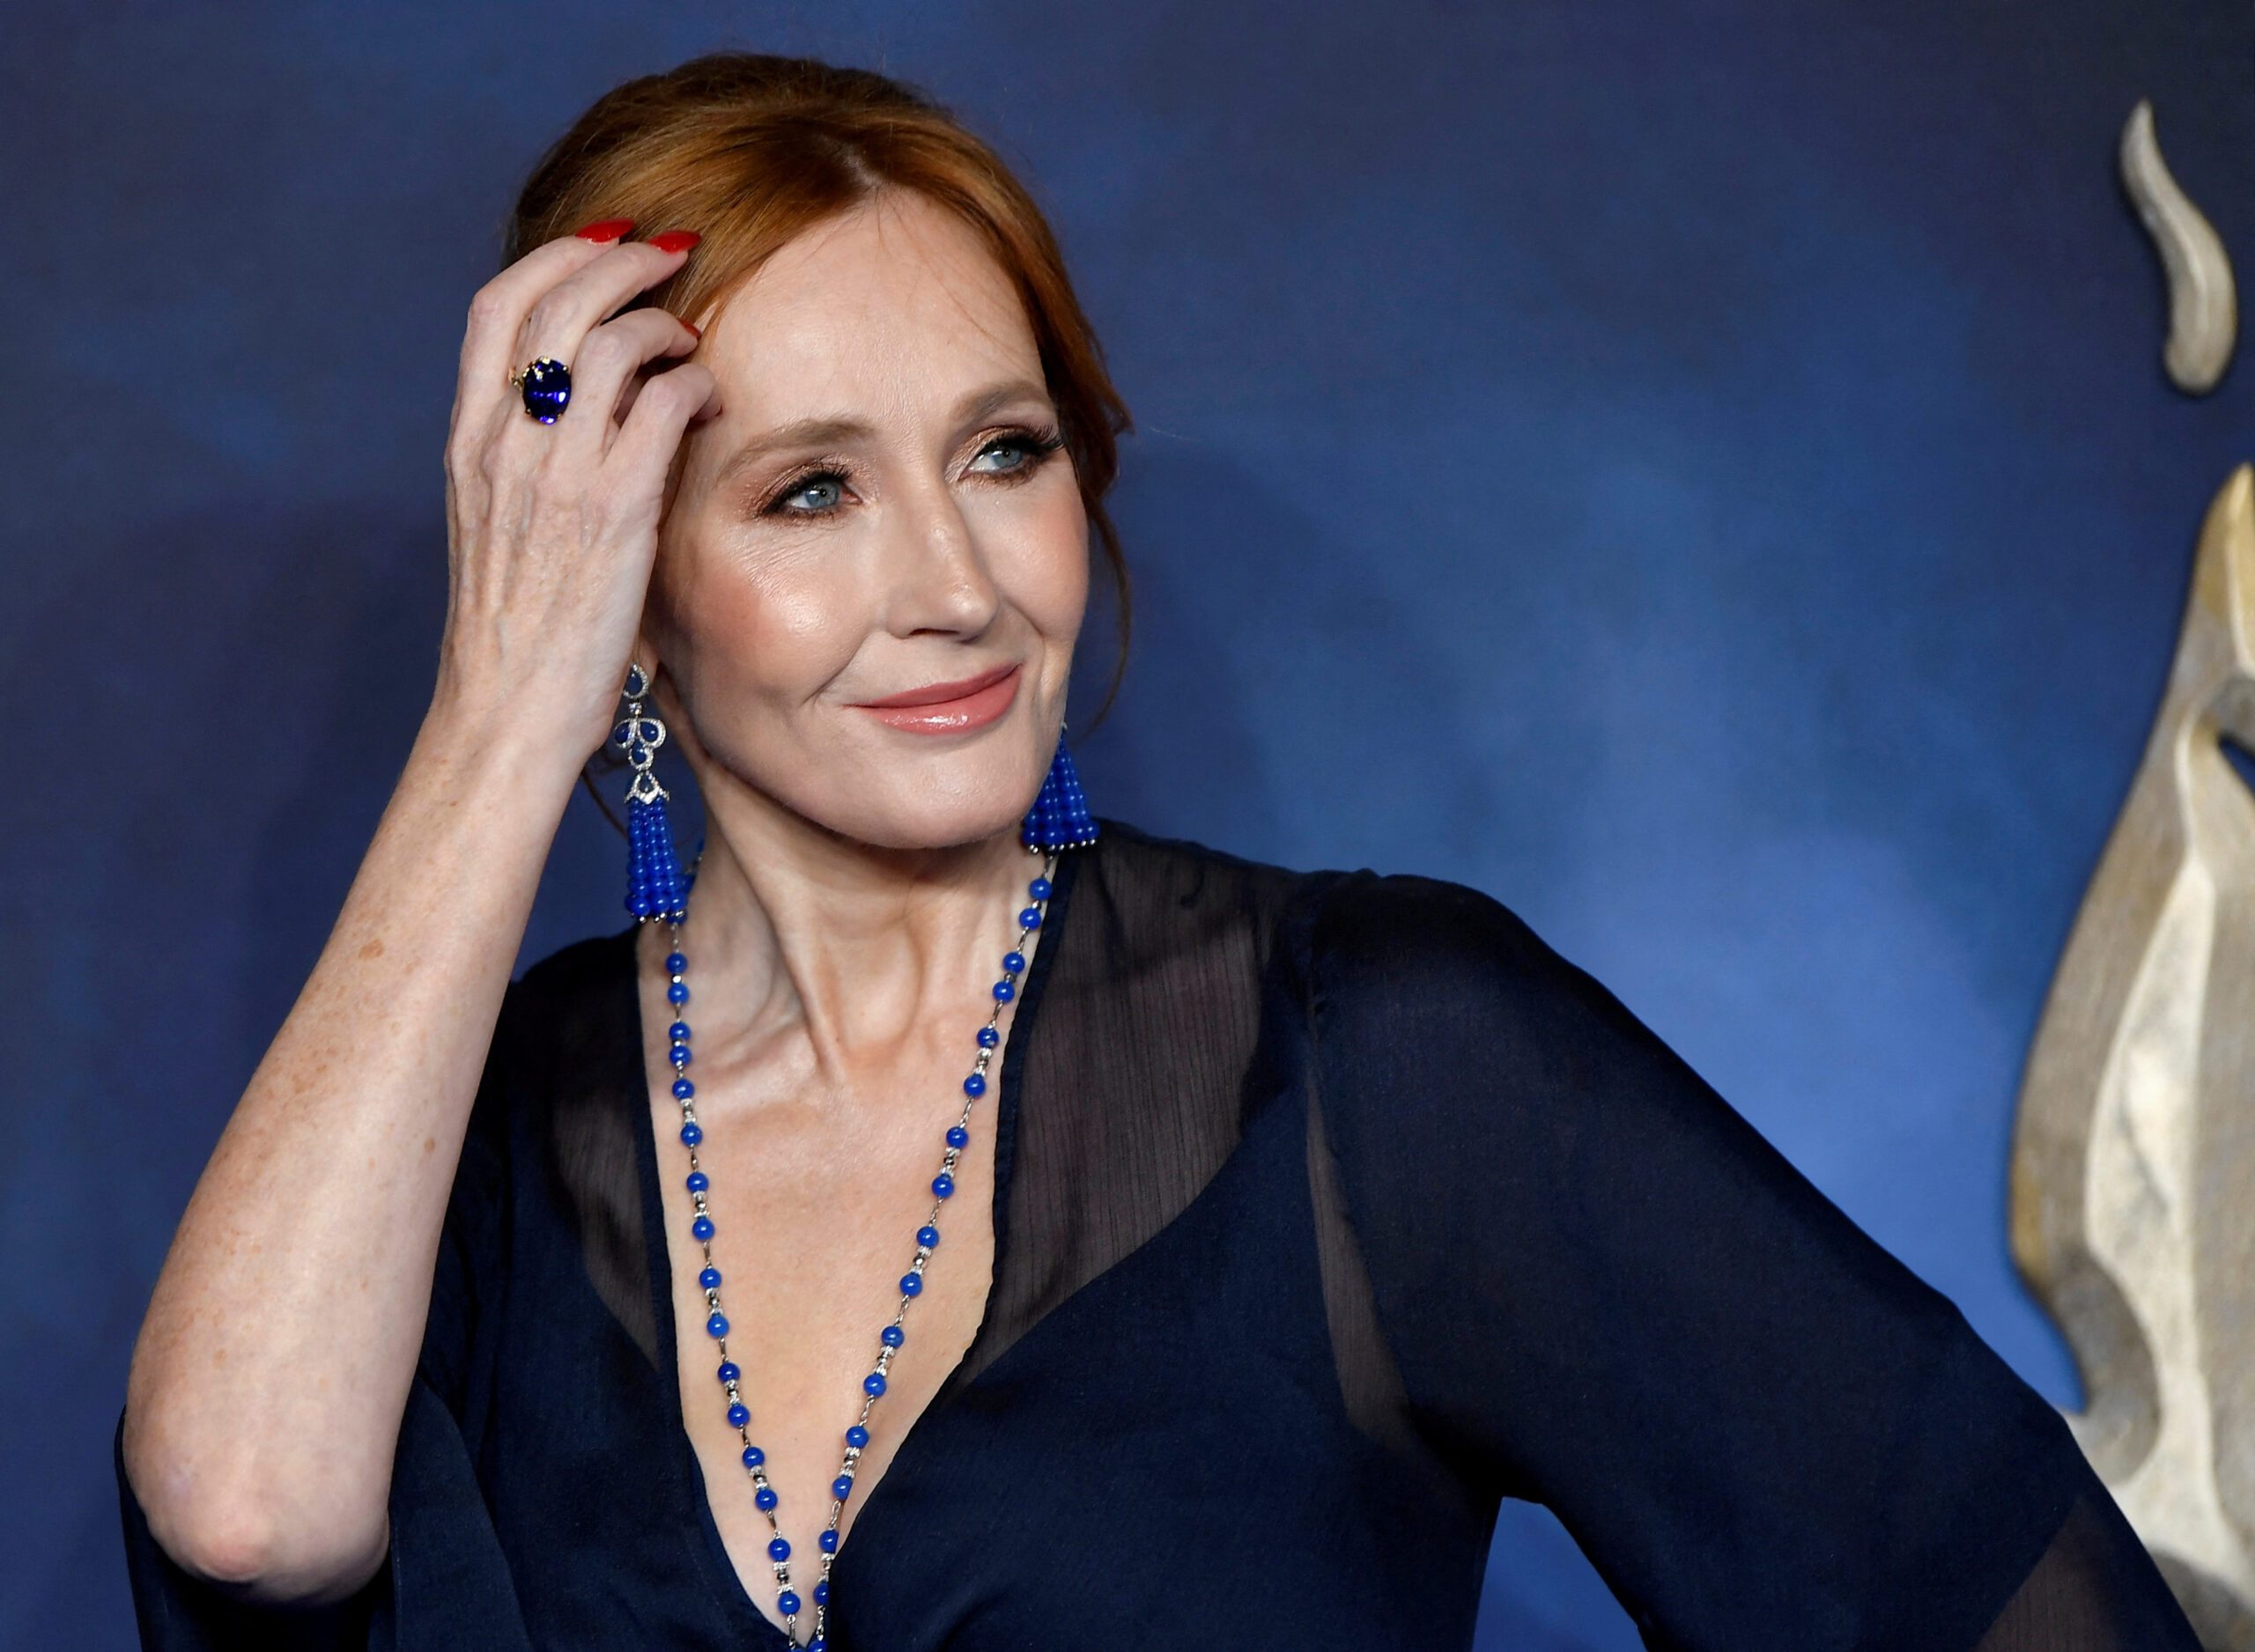 Transgender broadcaster reports J.K. Rowling to police over social media comments